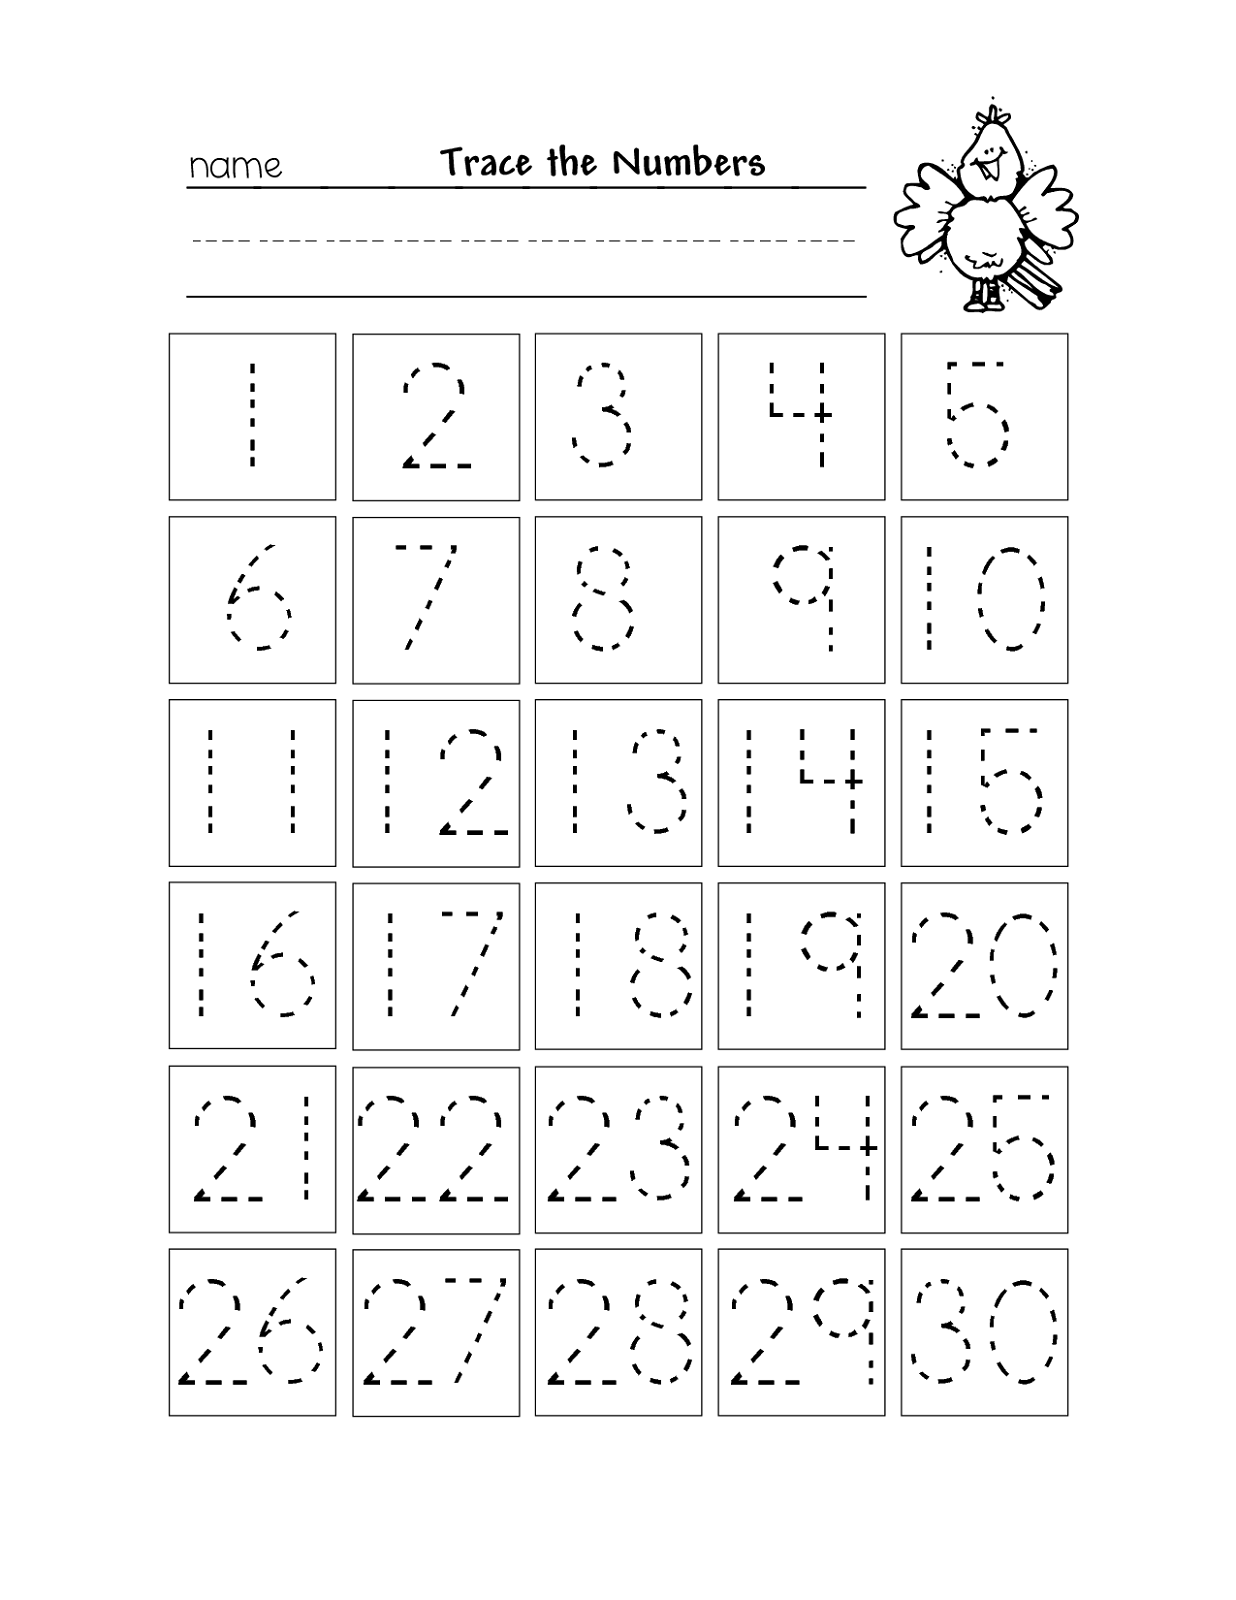 printable-numbers-1-30-template-printable-word-searches